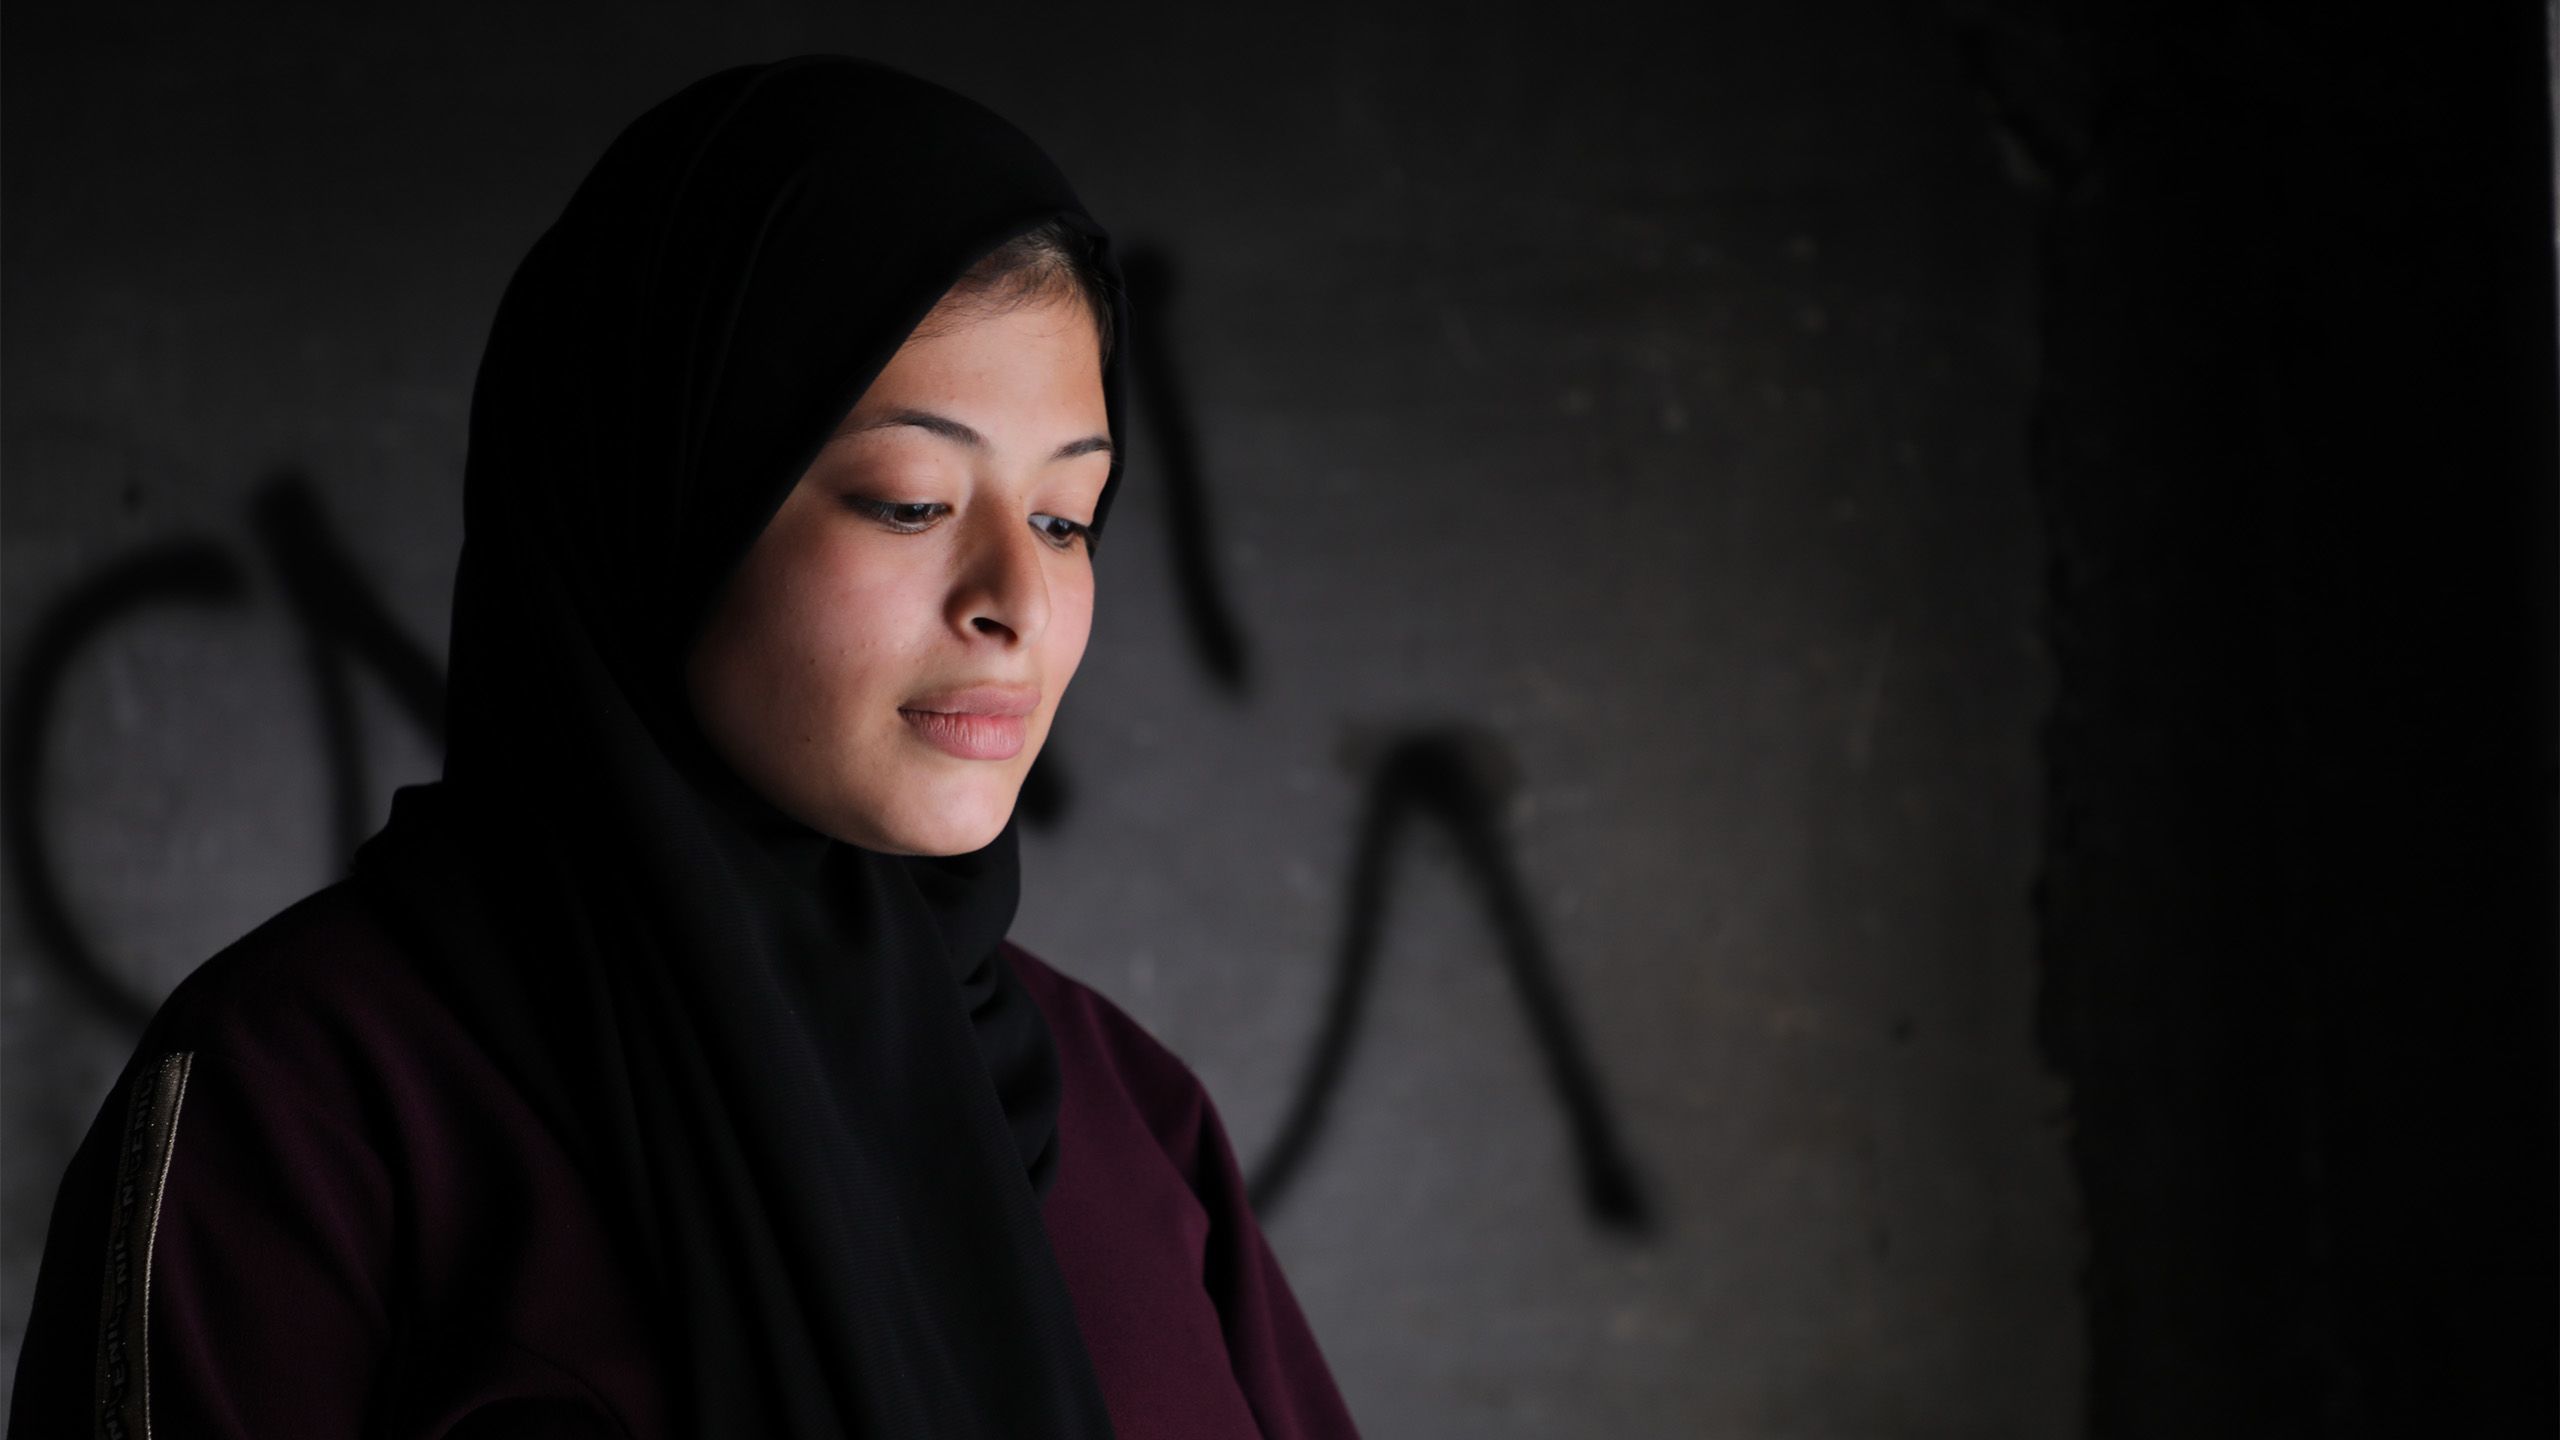 Portrait of Omaia, a 16-year-old Palestinian girl. She is wearing all black, and she is gazing at something in front of her.